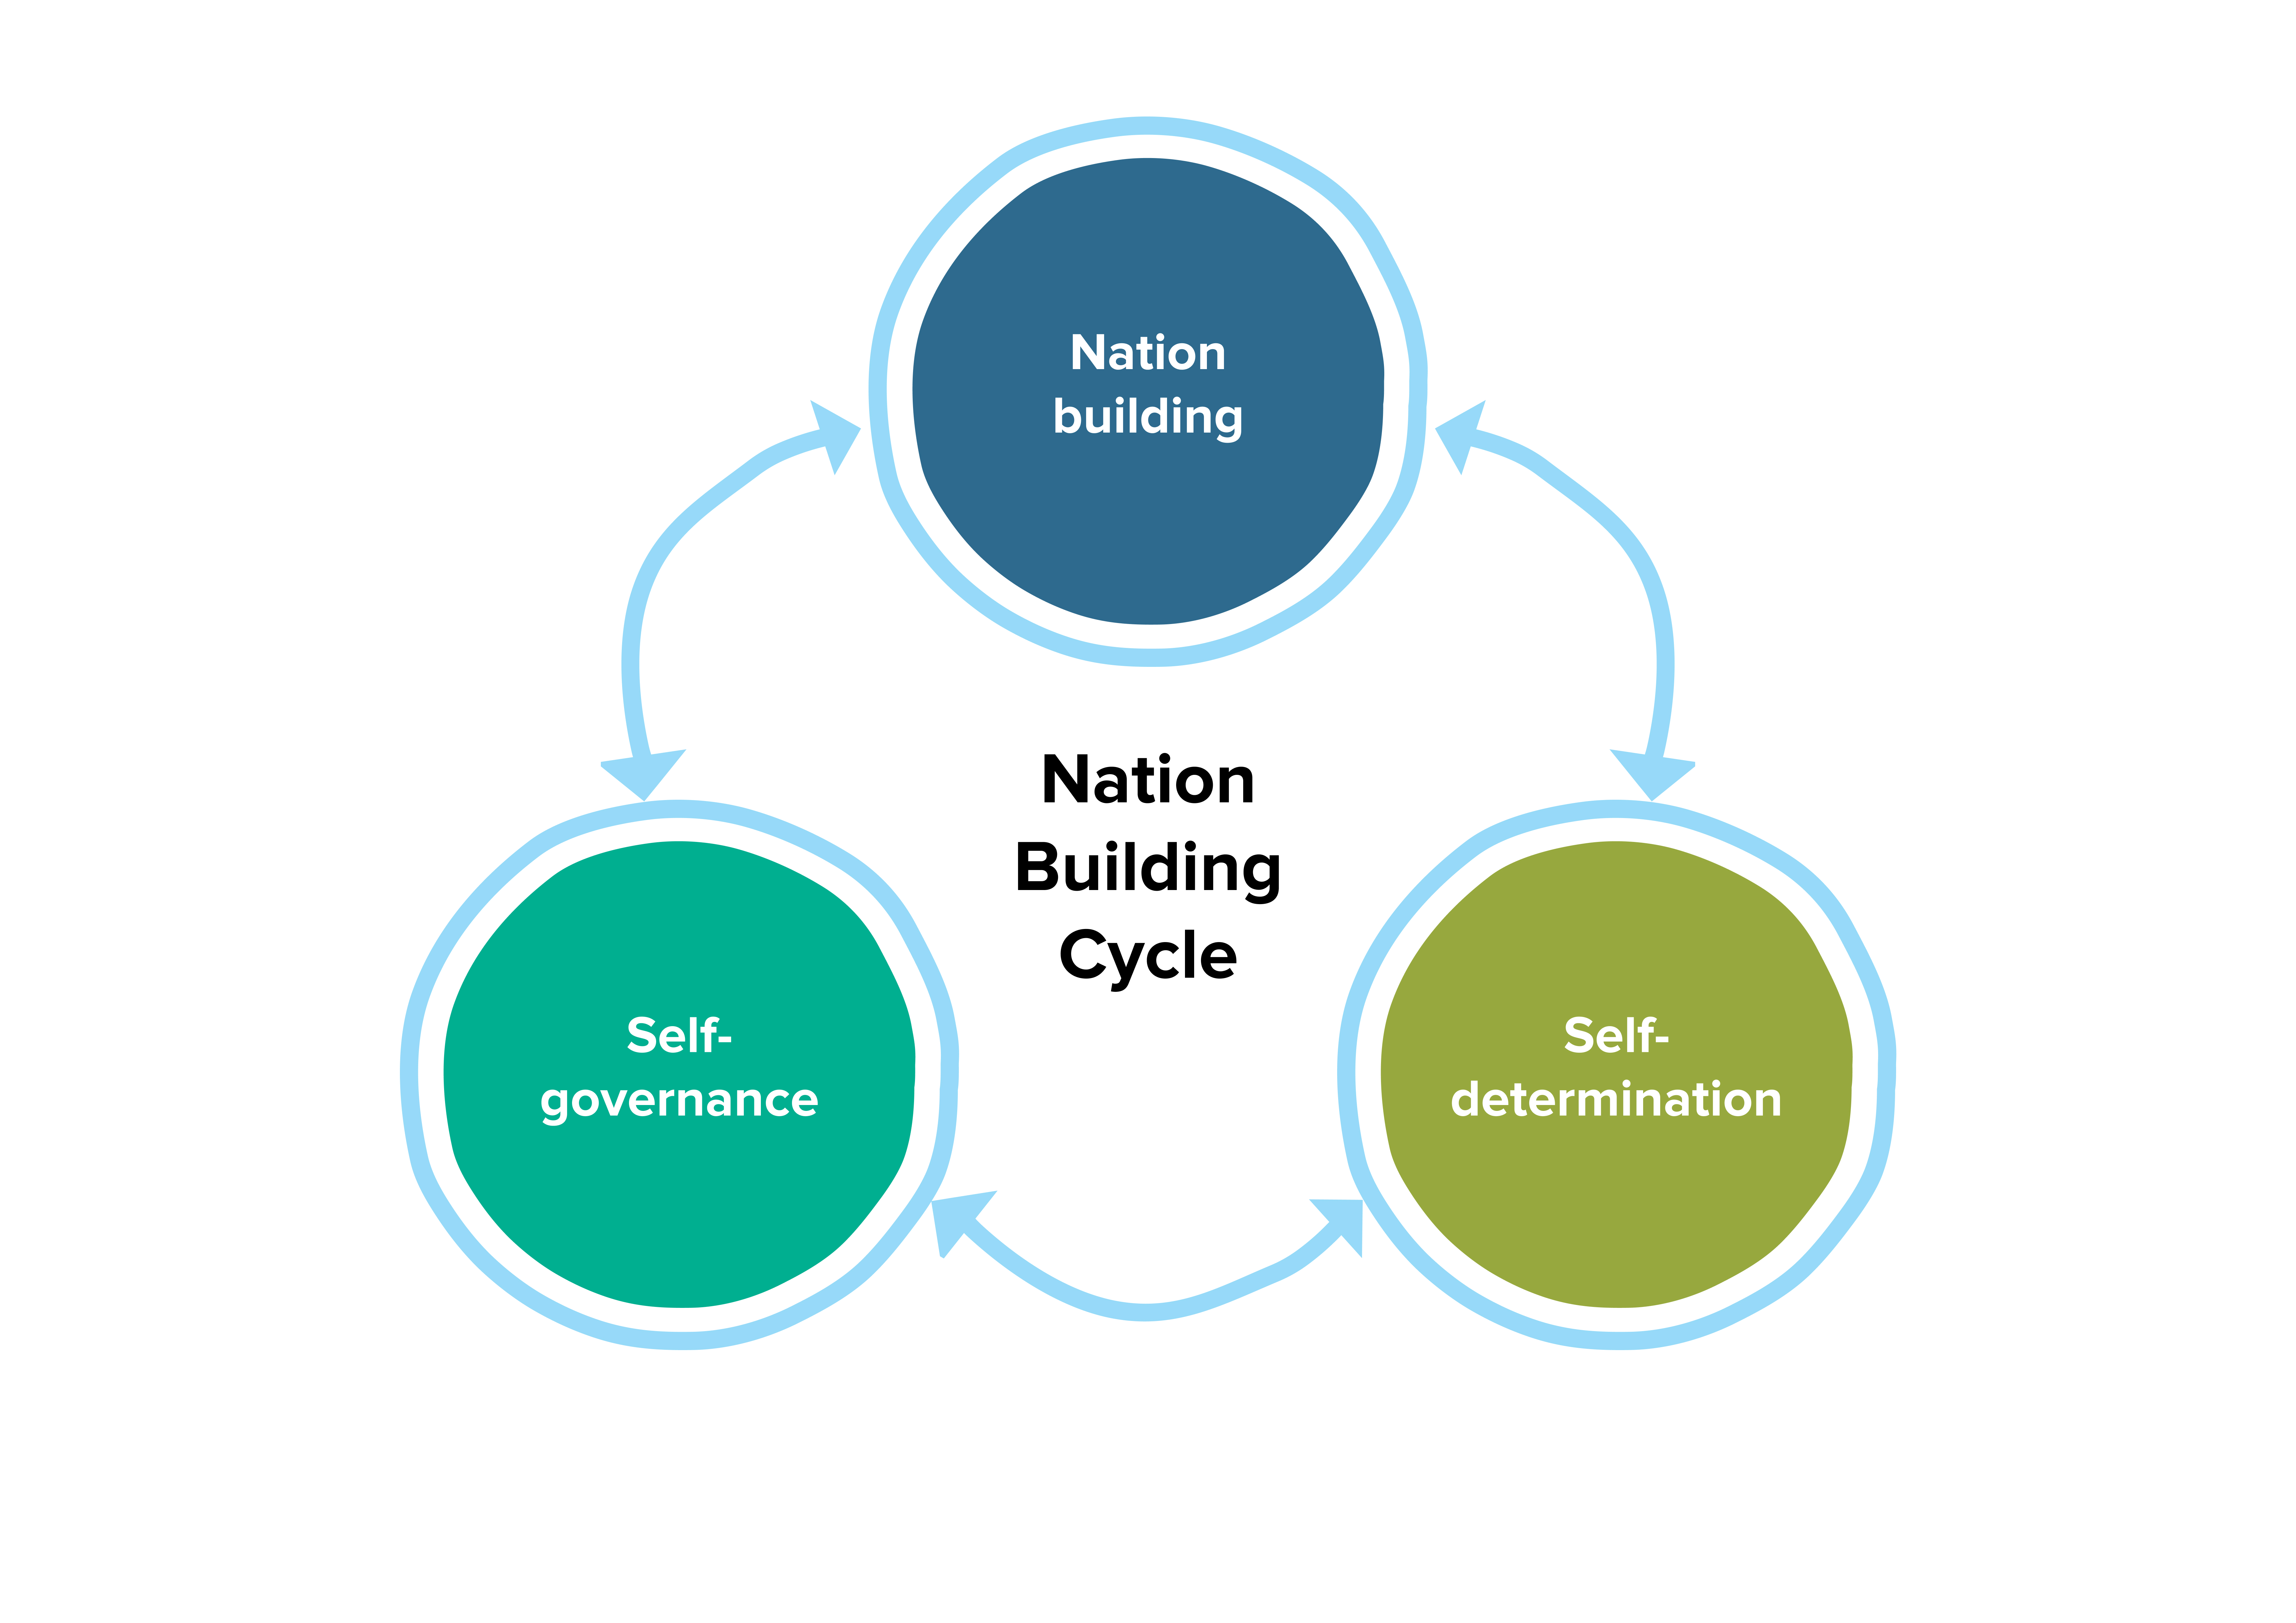 The relationship between nation building, self-governance and self-determination